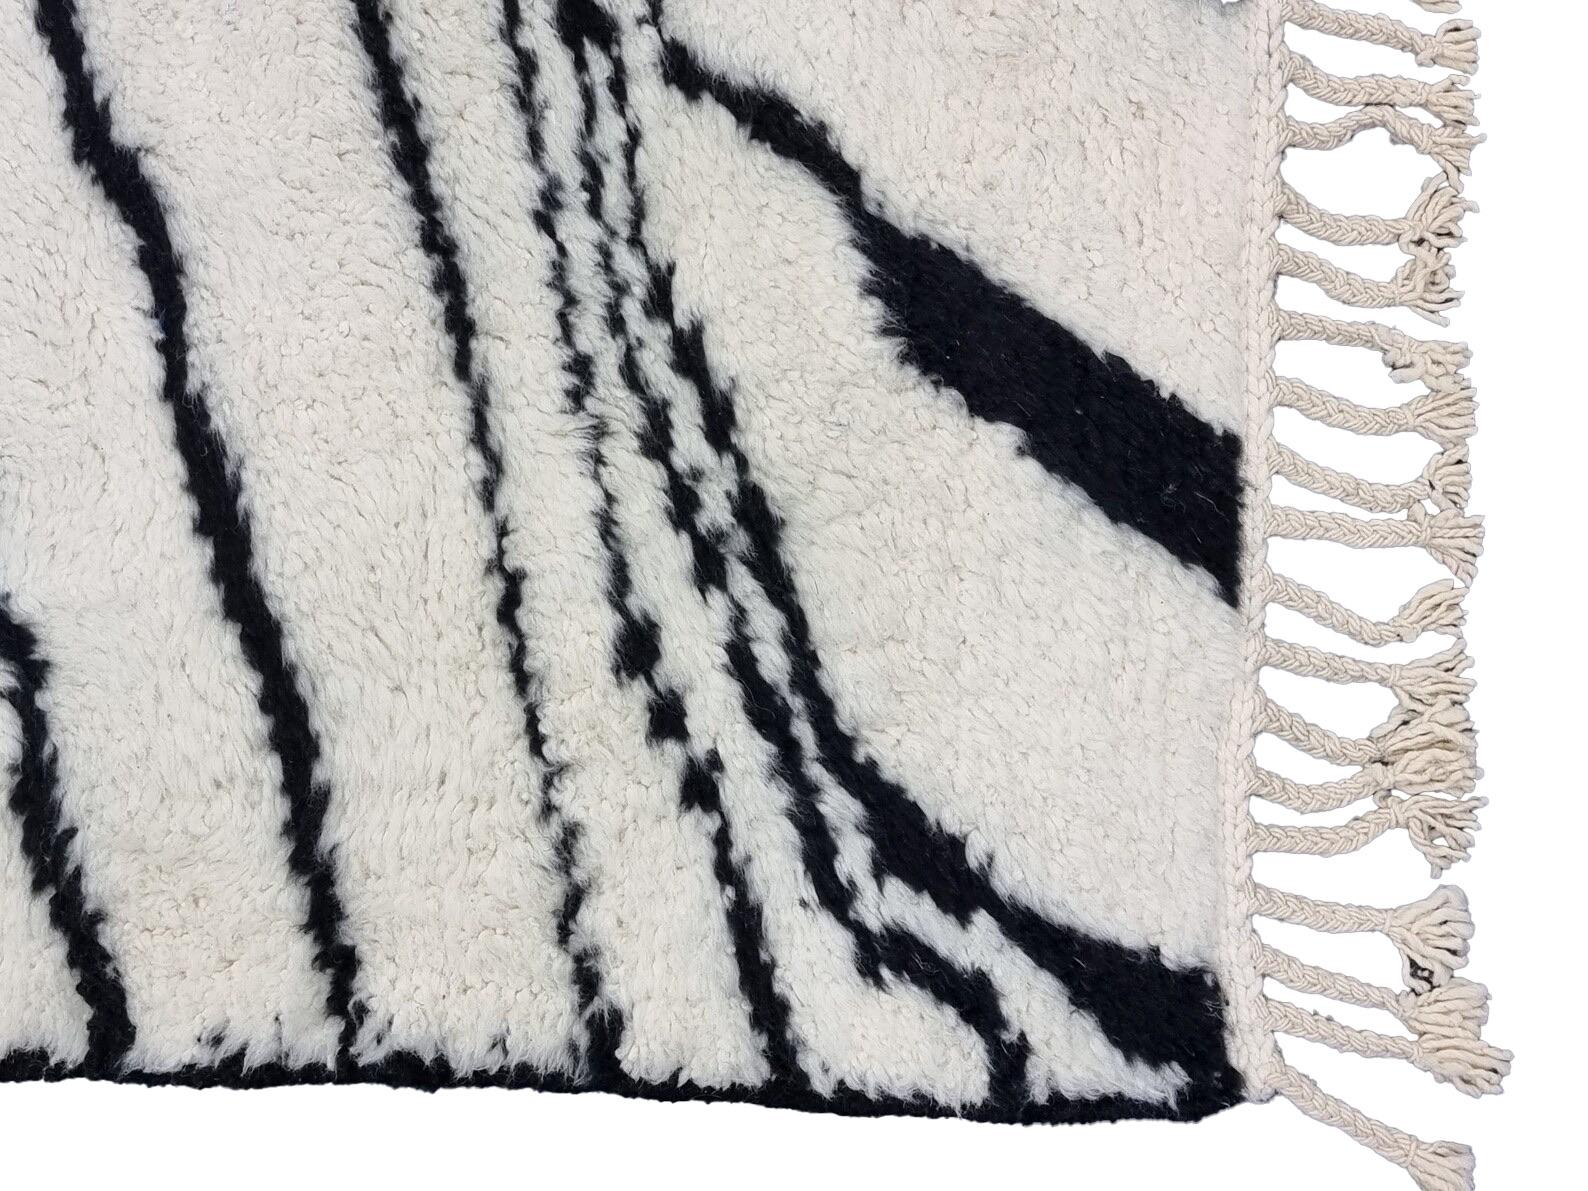 Moroccan Boujaad rug handwoven out of natural and soft sheep wool featuring black and white stripes.